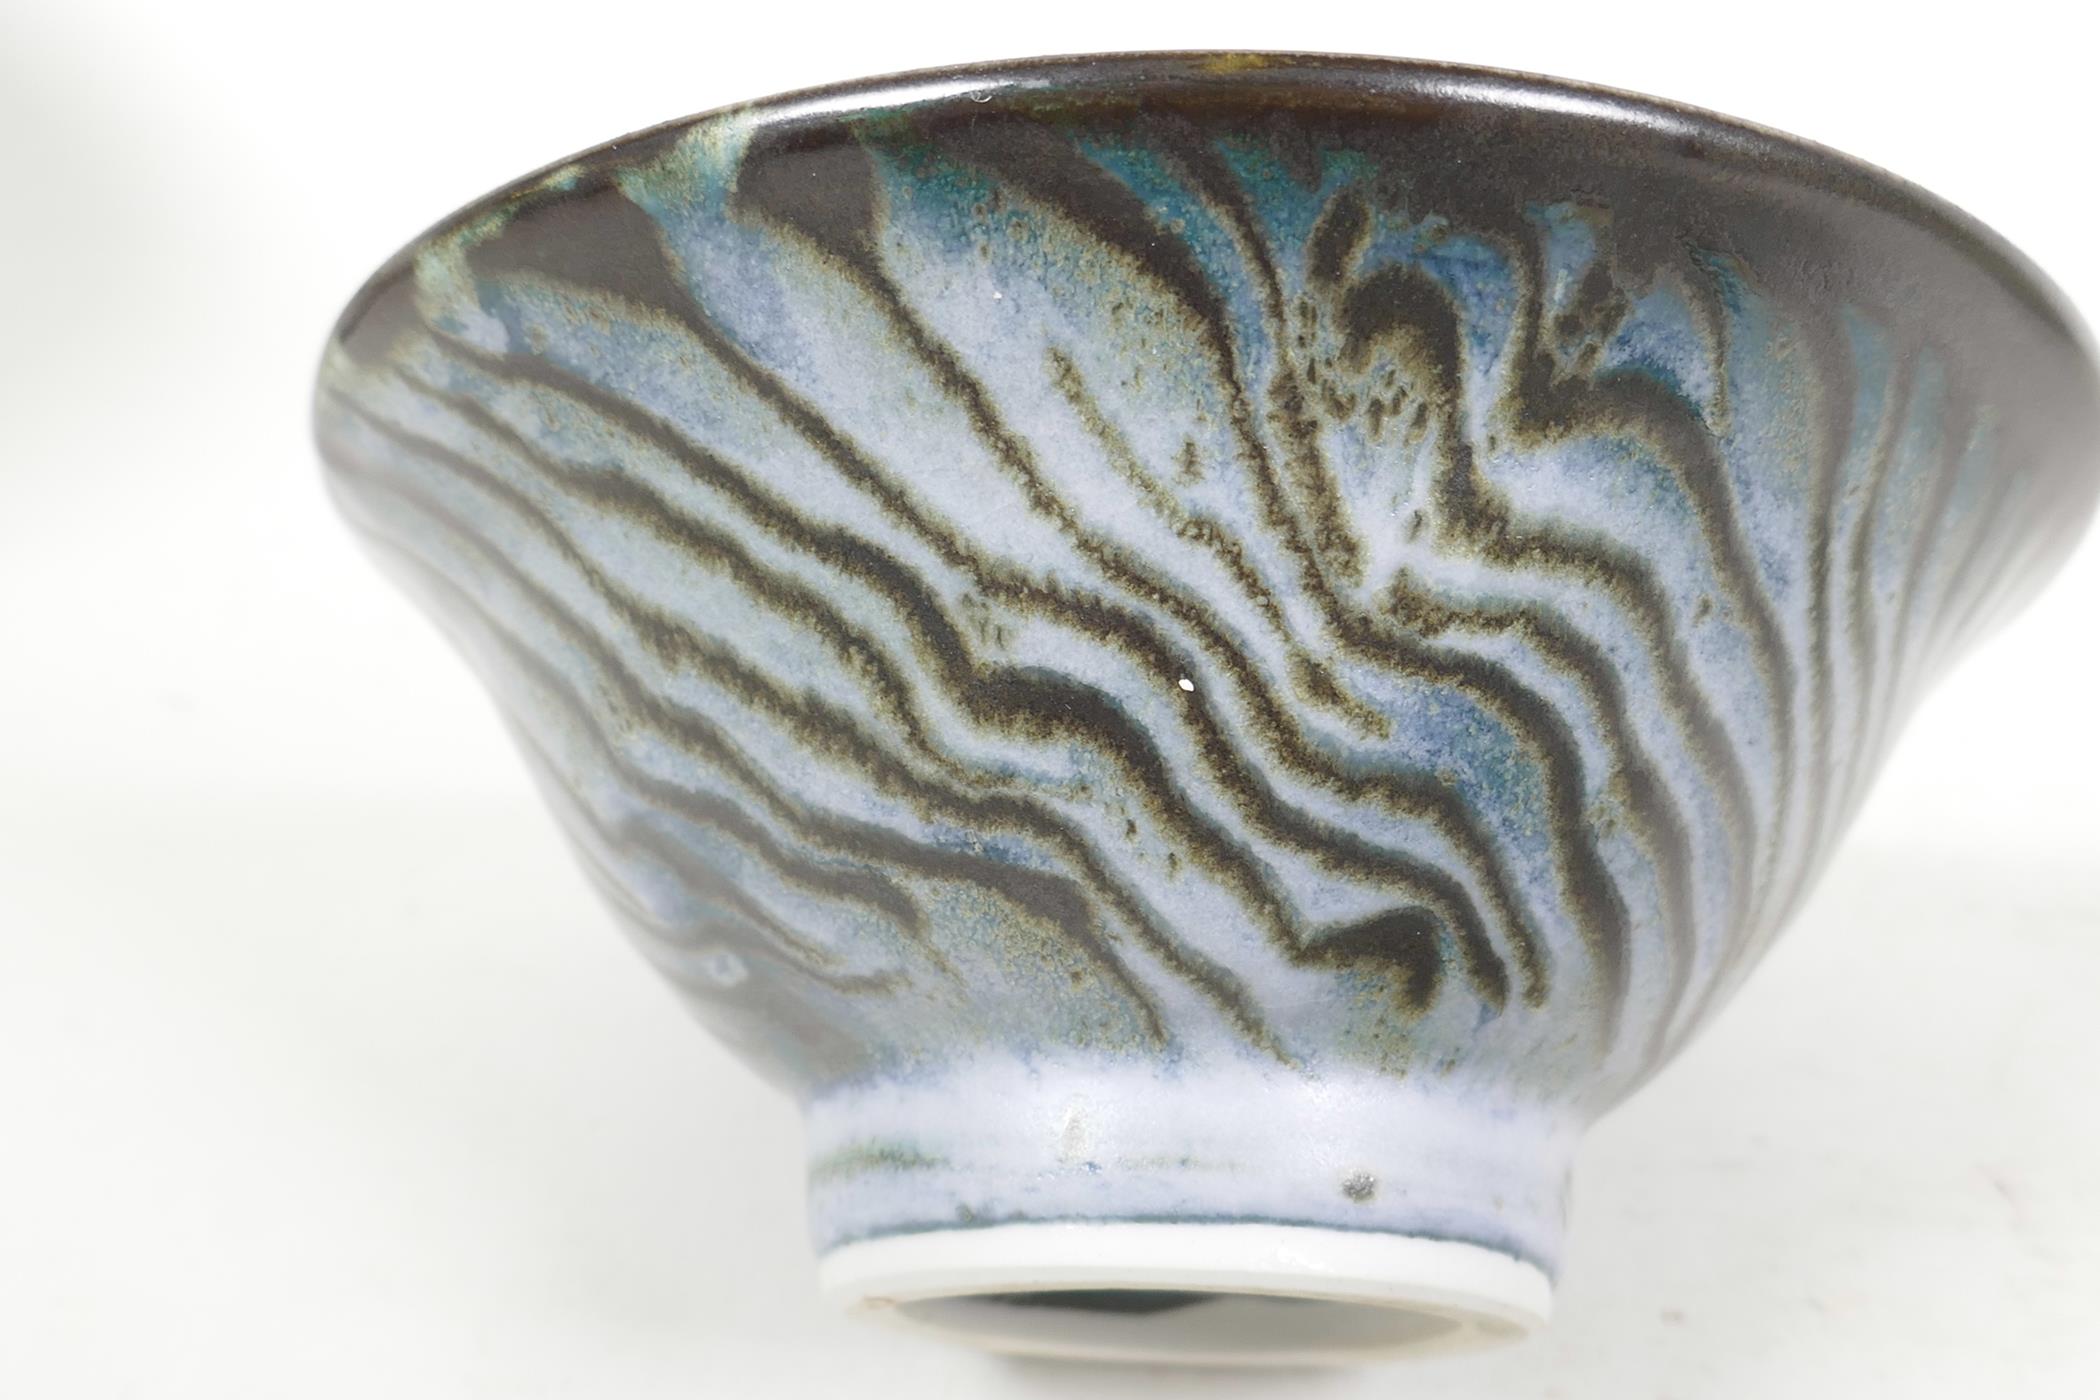 Studio pottery, two bowls and a shallow dish, slip glazed in grey/blue and brown, dish 6½" diameter - Image 4 of 5